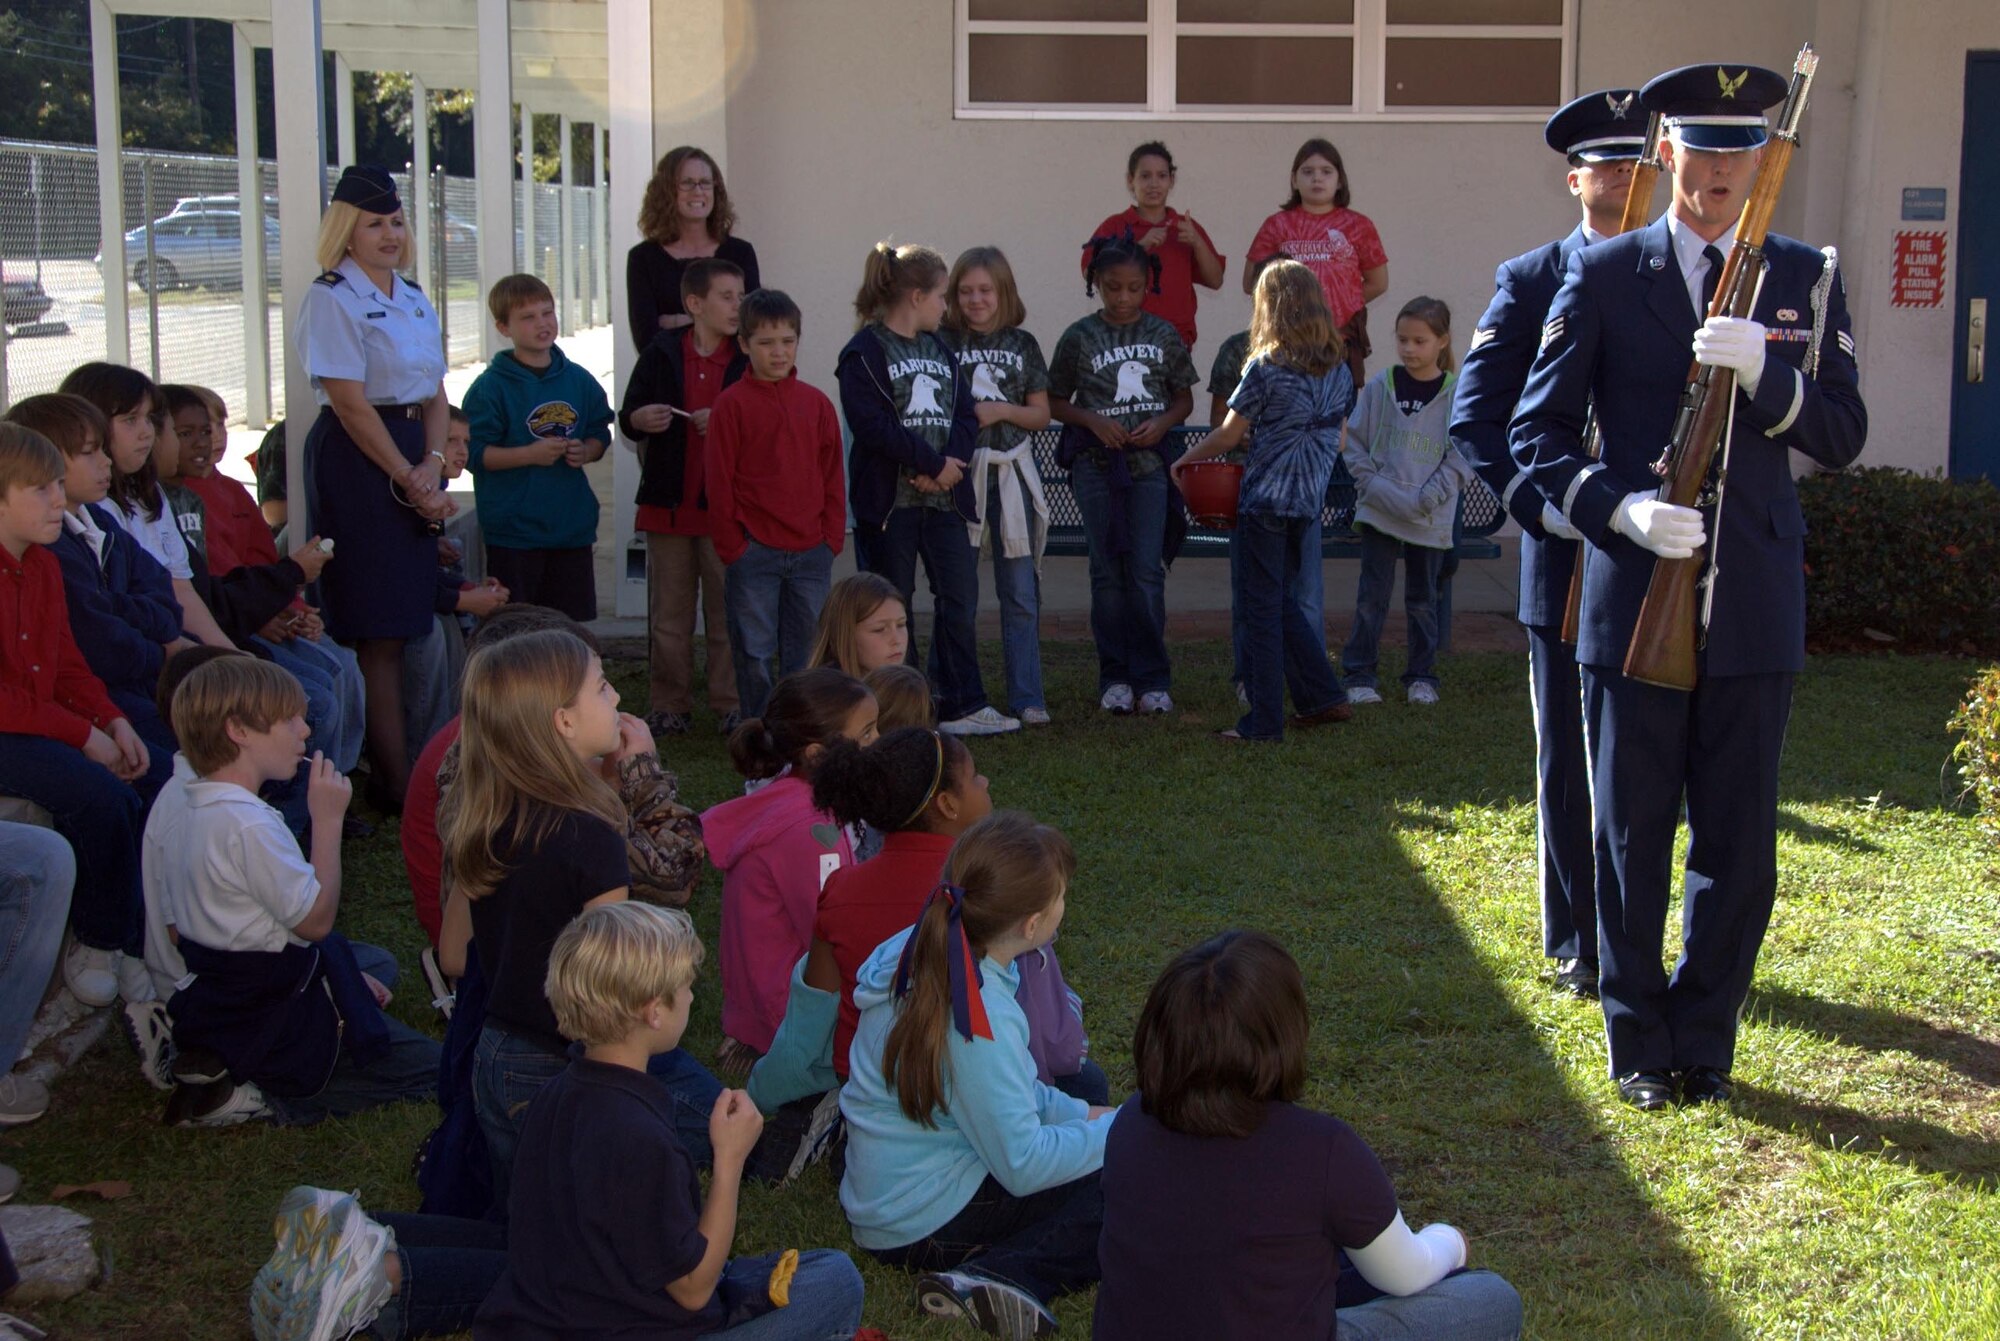 325th Fighter Wing Honor Guard demonstrates rifle maneuvers that are used for flag ceremonies during a recent visit to Lynn Haven Elementary.  Students learned proper American flag etiquette and how to raise and lower the flag. (U.S. Air Force photo by: Lt. Col. Malcolm Kemeny)

